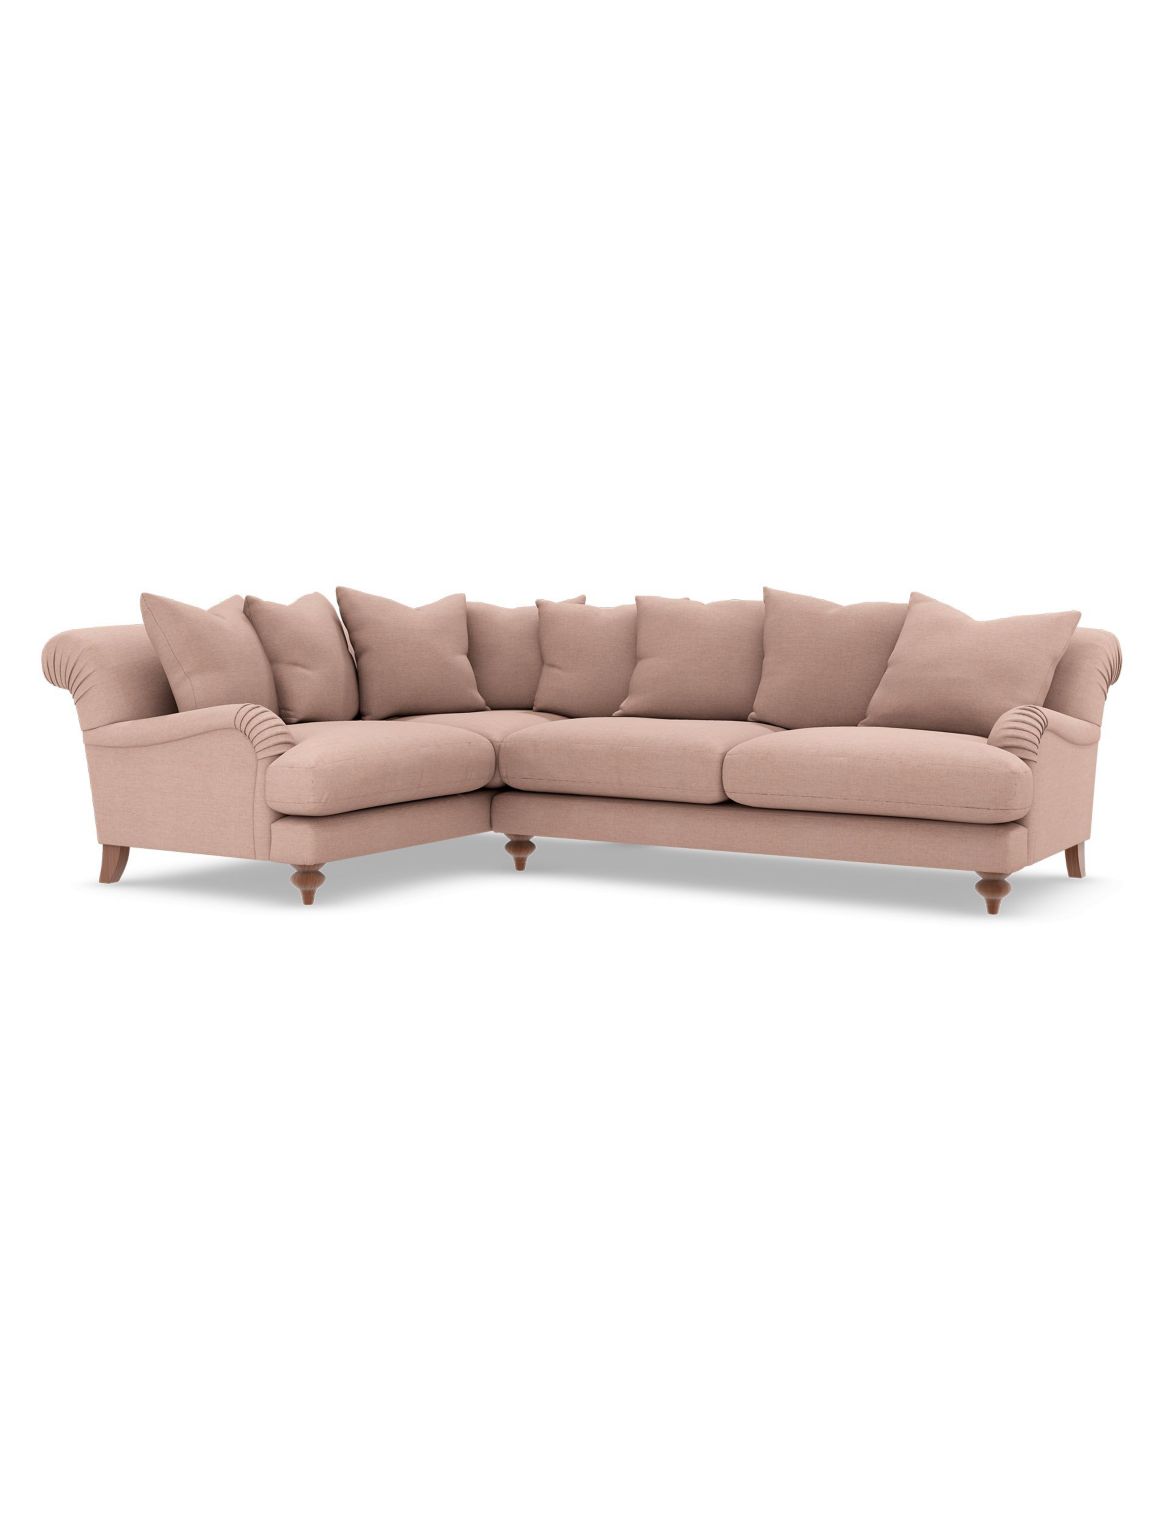 Isabelle Small Corner Sofa (Left-Hand) pink